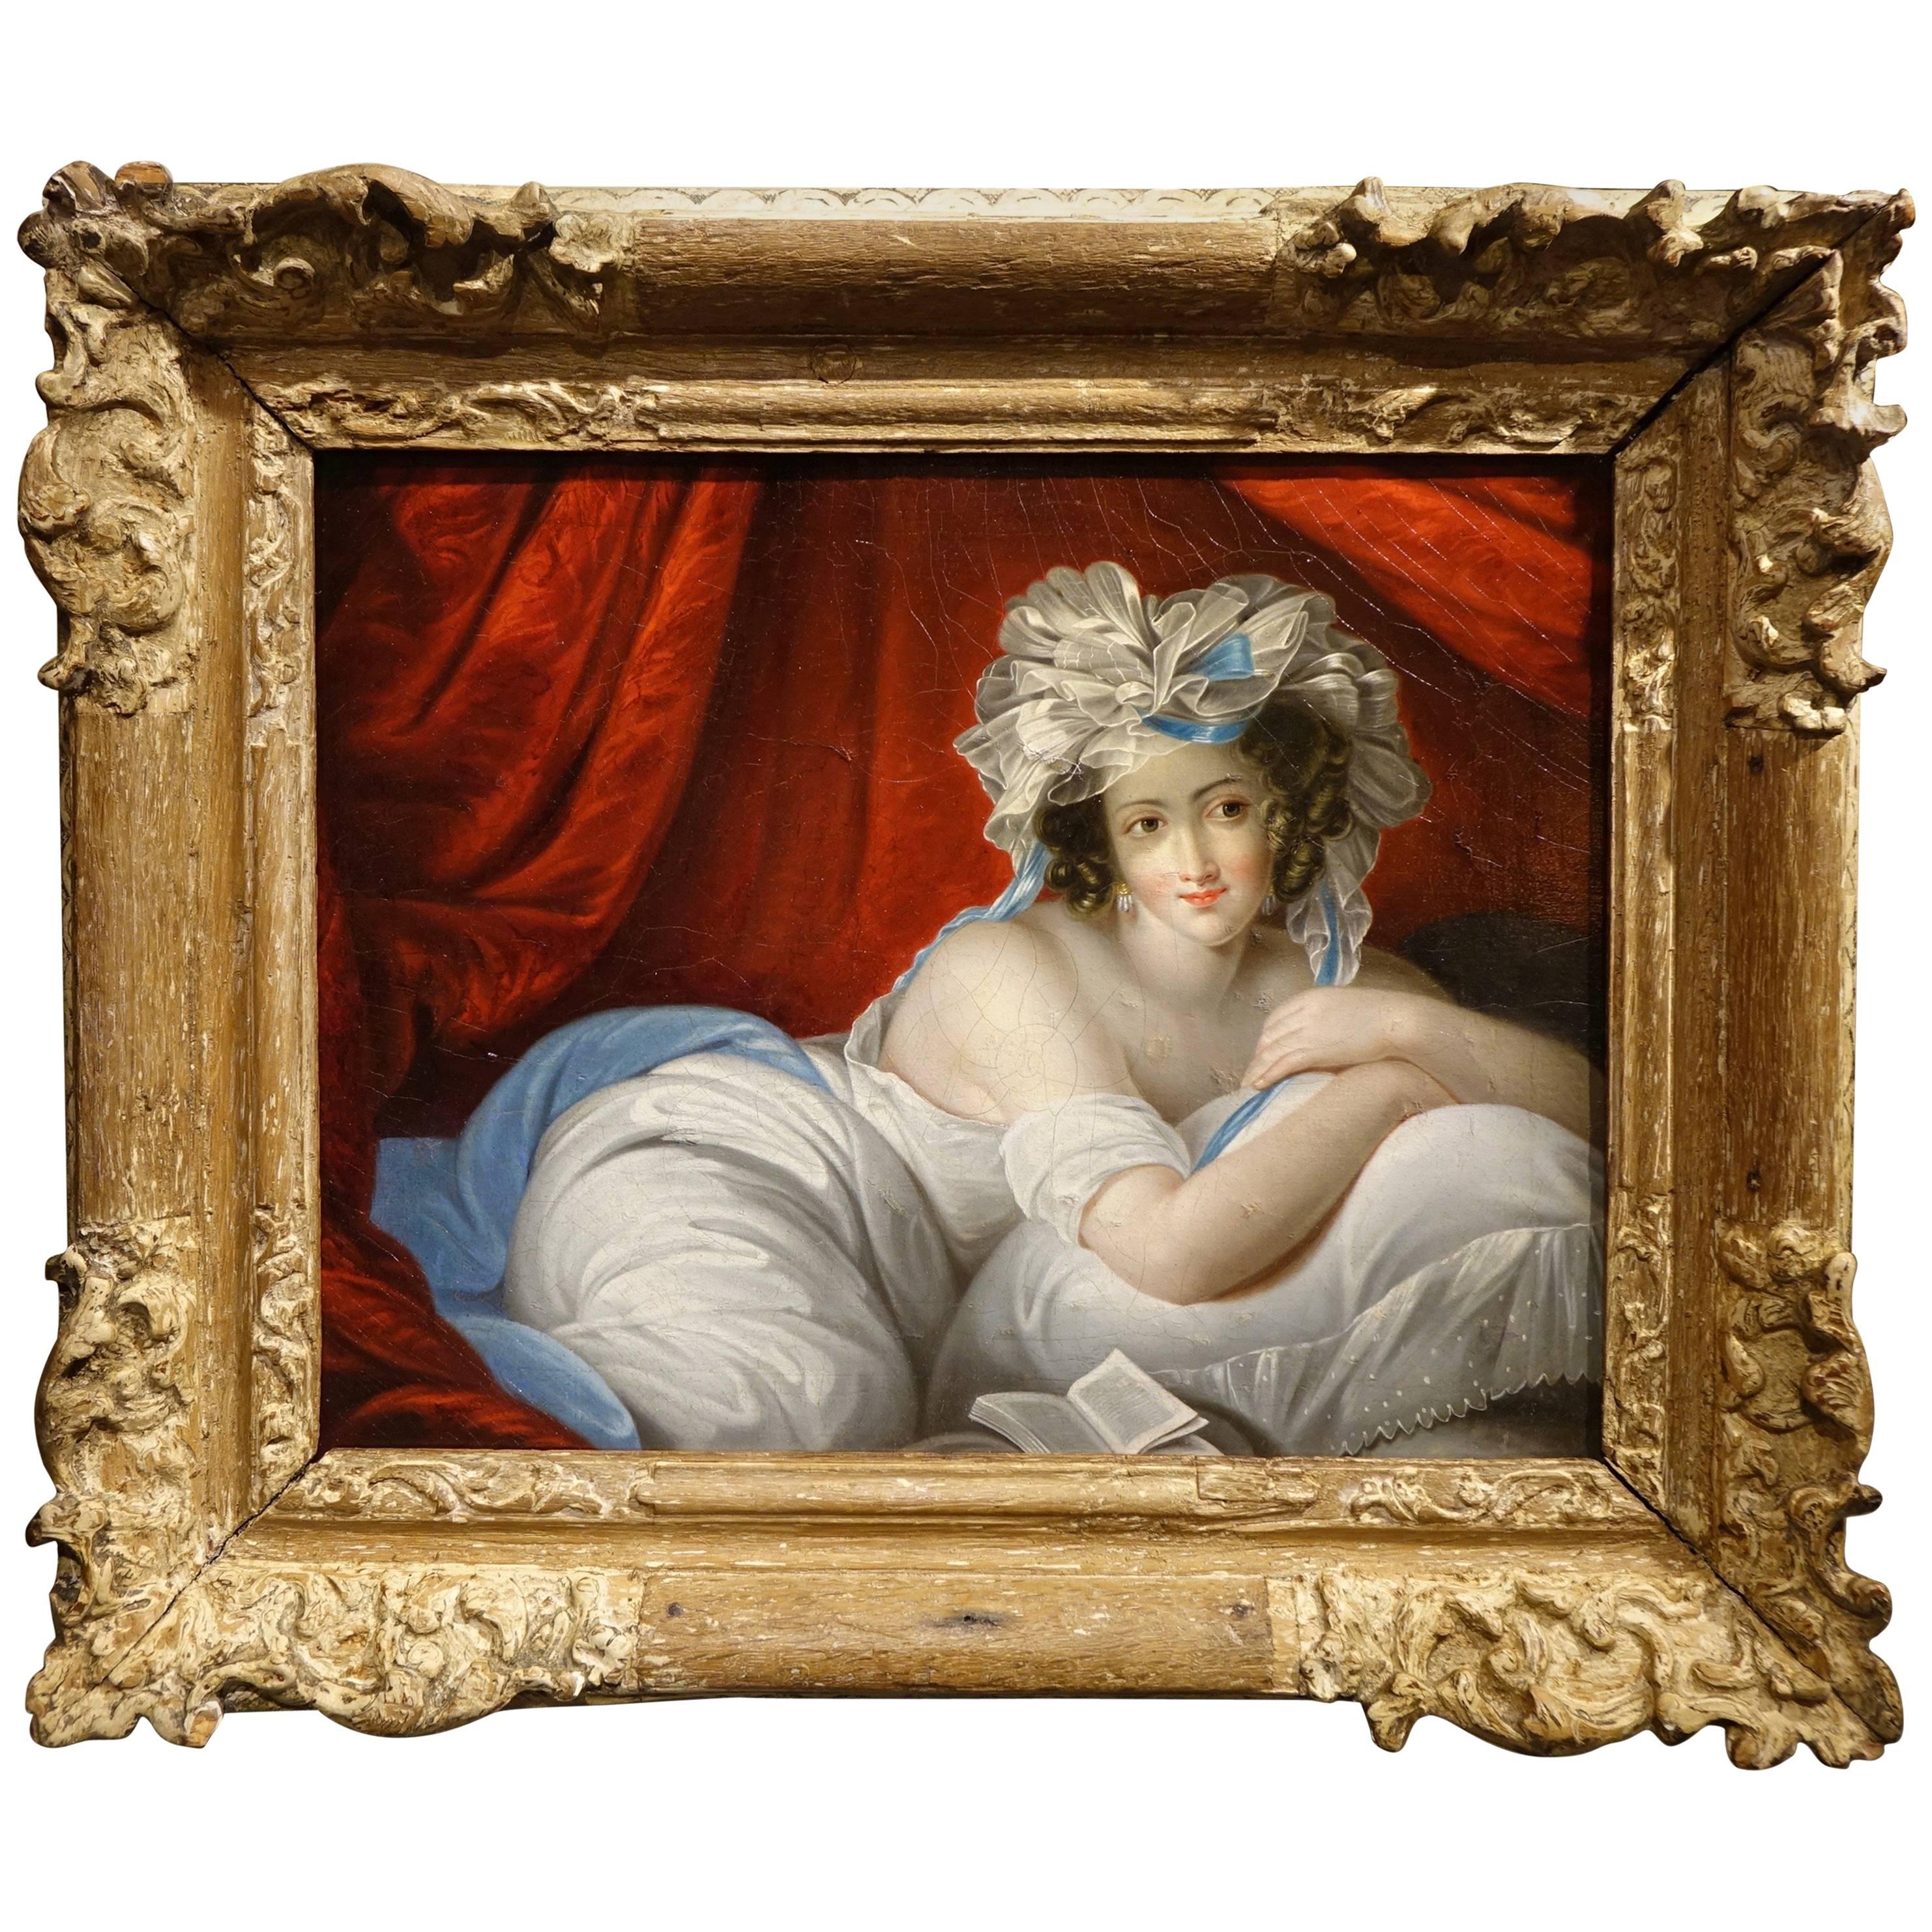 Young Woman Languid on Her Bed, French School, circa 1770